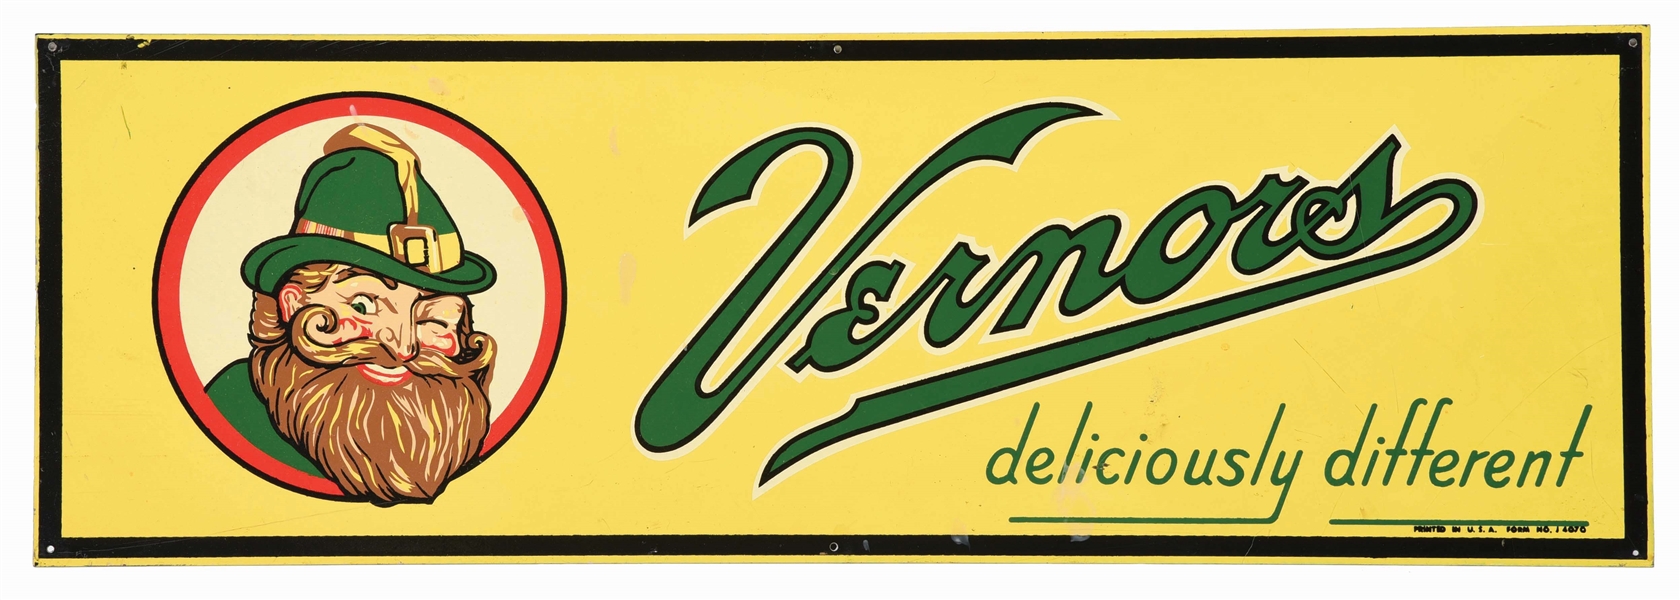 SINGLE SIDED PAINTED METAL "VERNORS DELICIOUSLY DIFFERENT" SIGN.